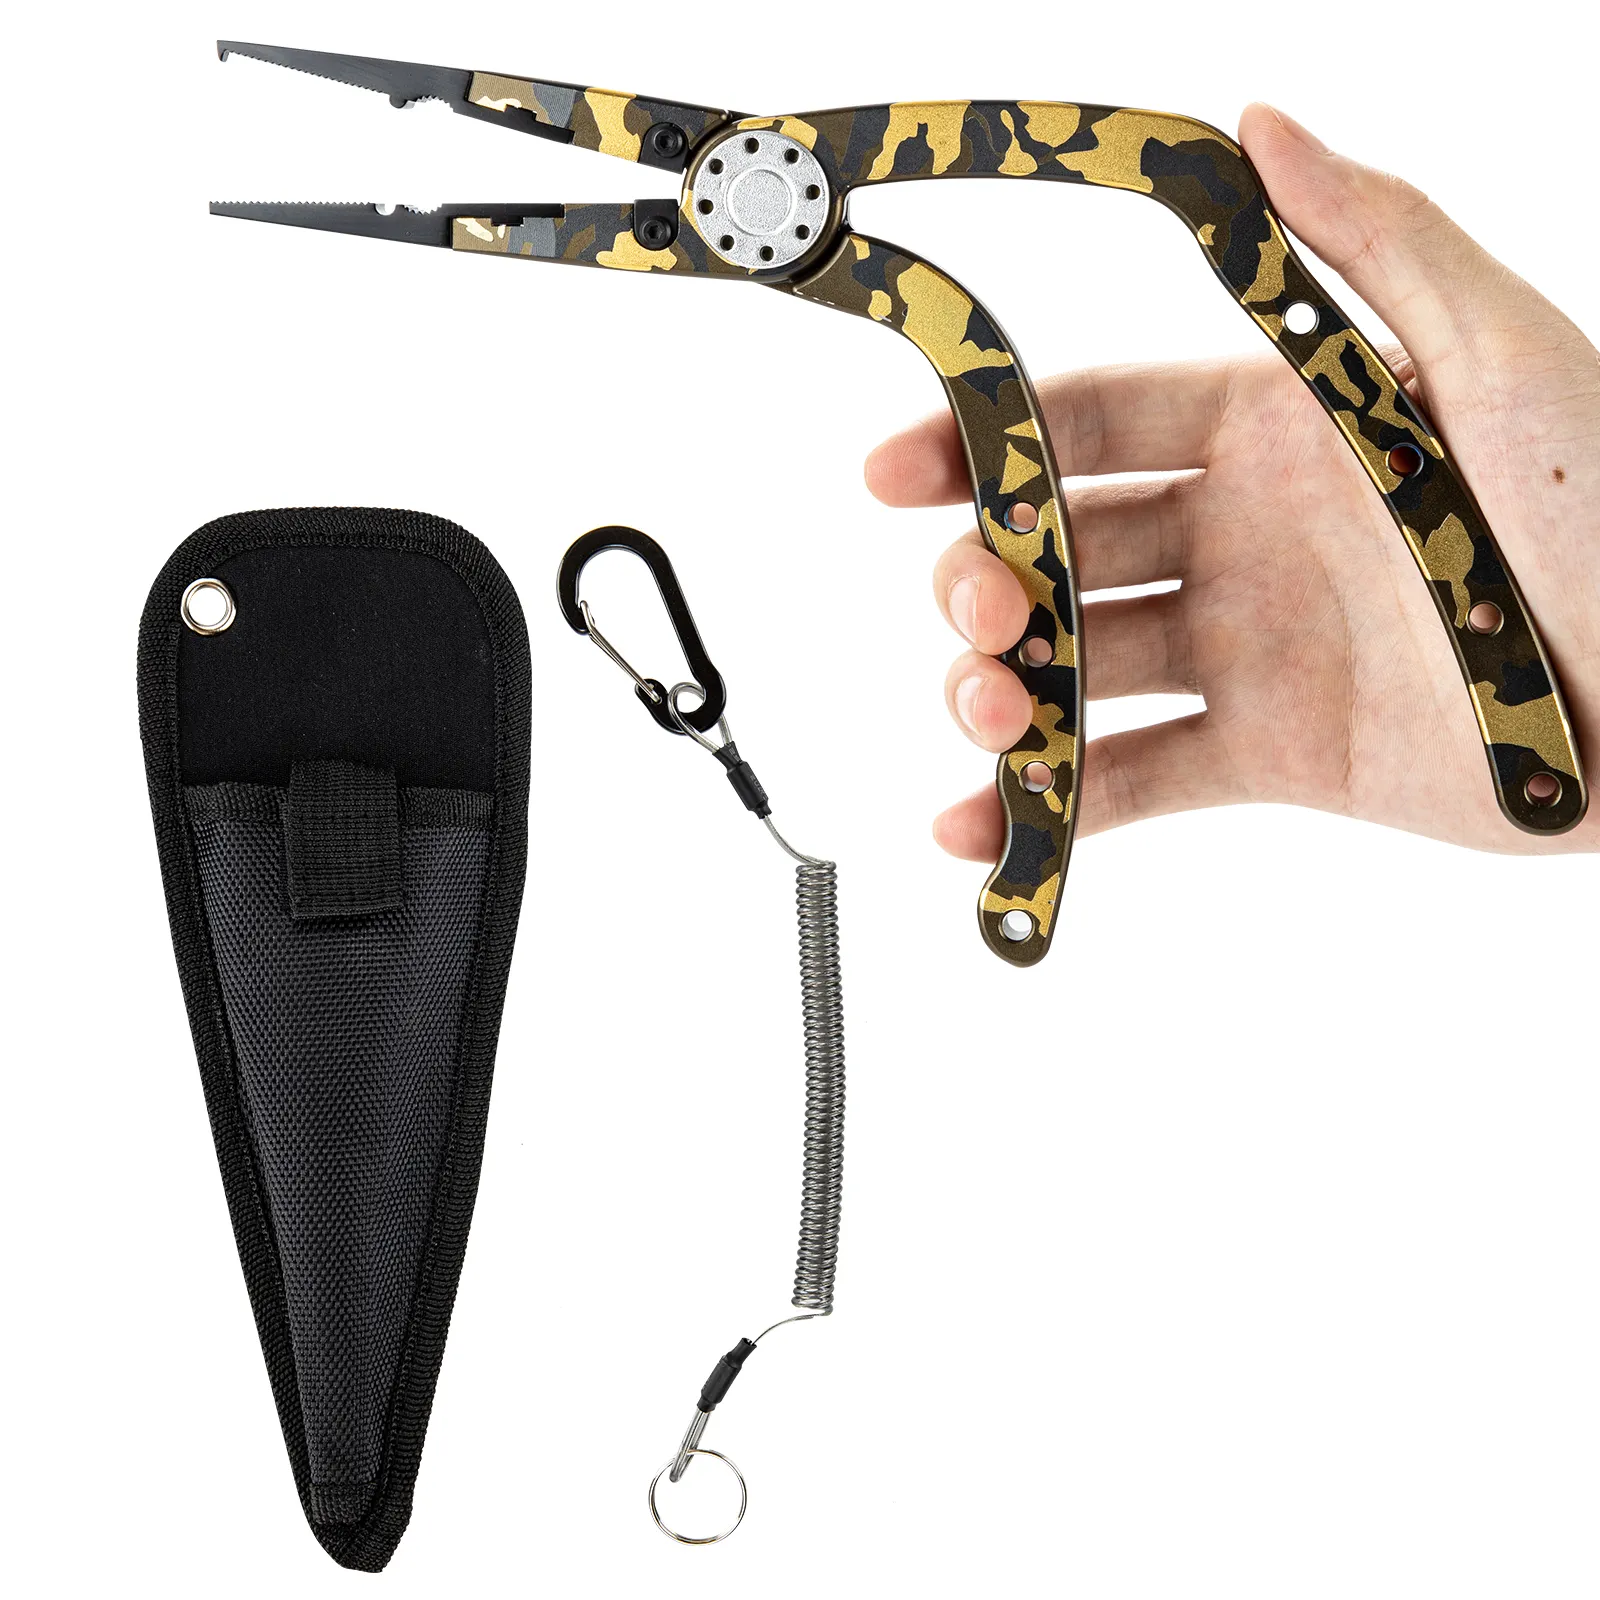 Household red and camouflage Fishing Tools Stainless Steel Lip Grip Gripper Hook Remover Aluminum Split Ring Fishing Pliers Set